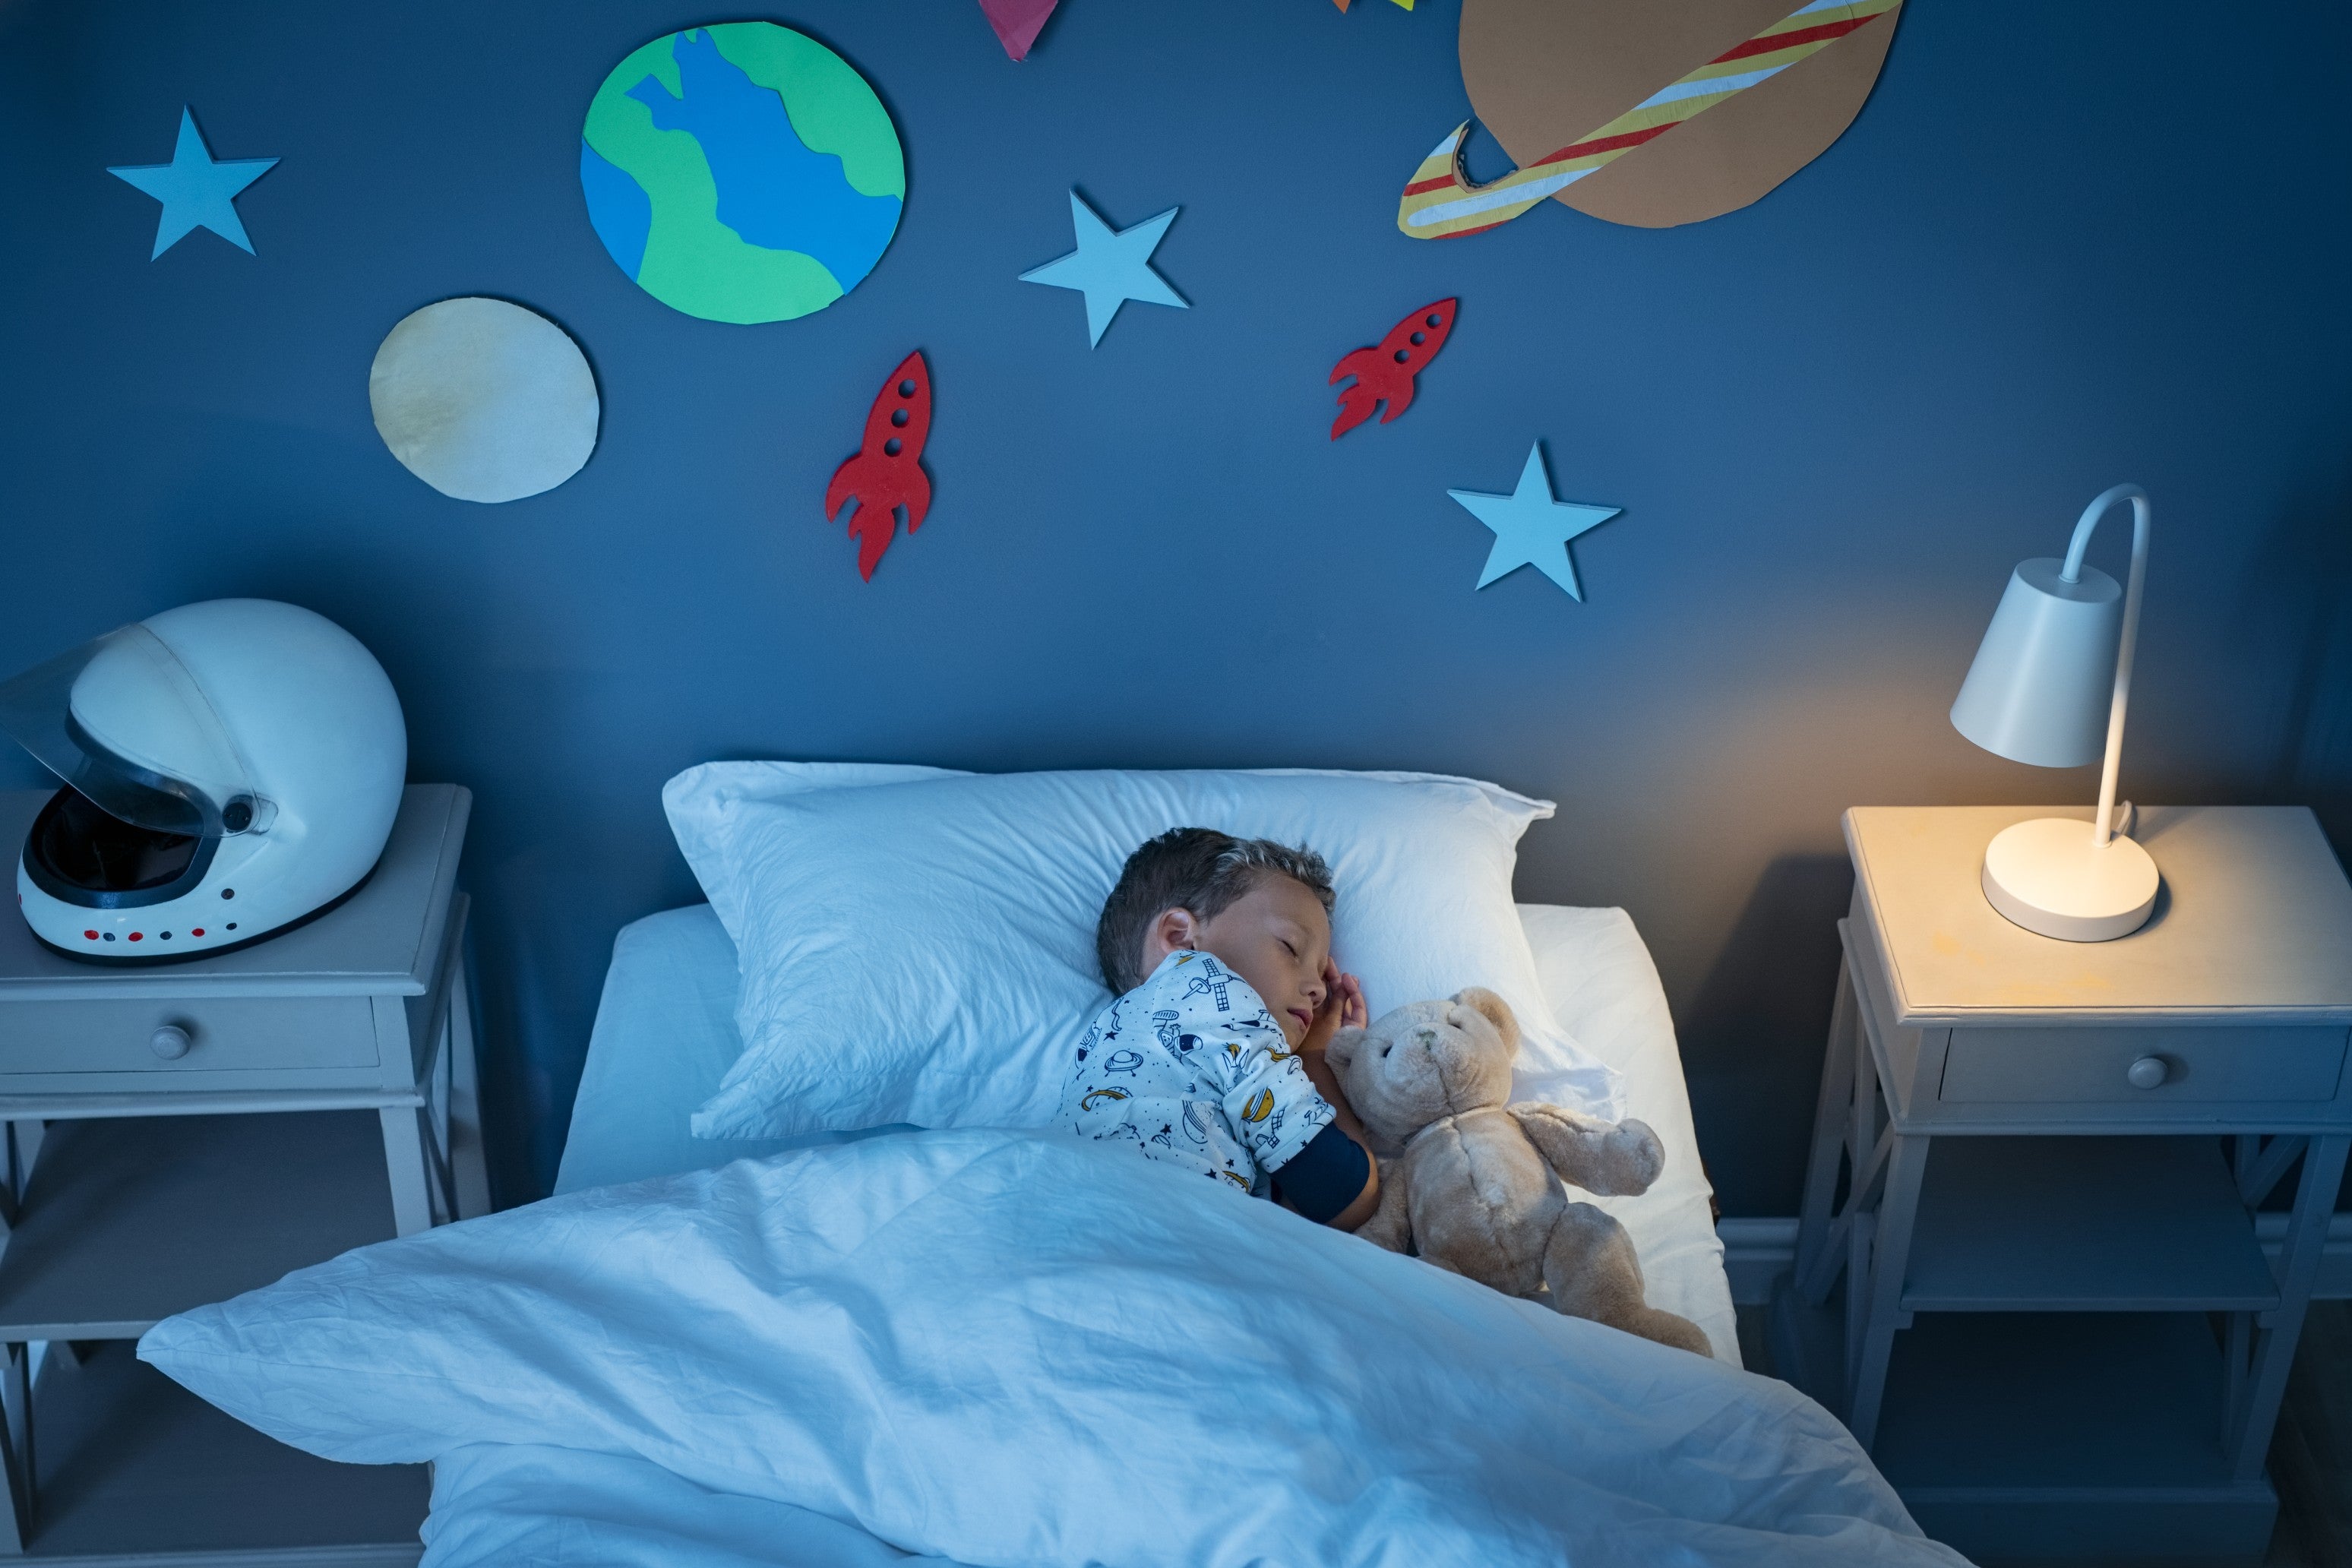 Young boy asleep in his bed with a light on